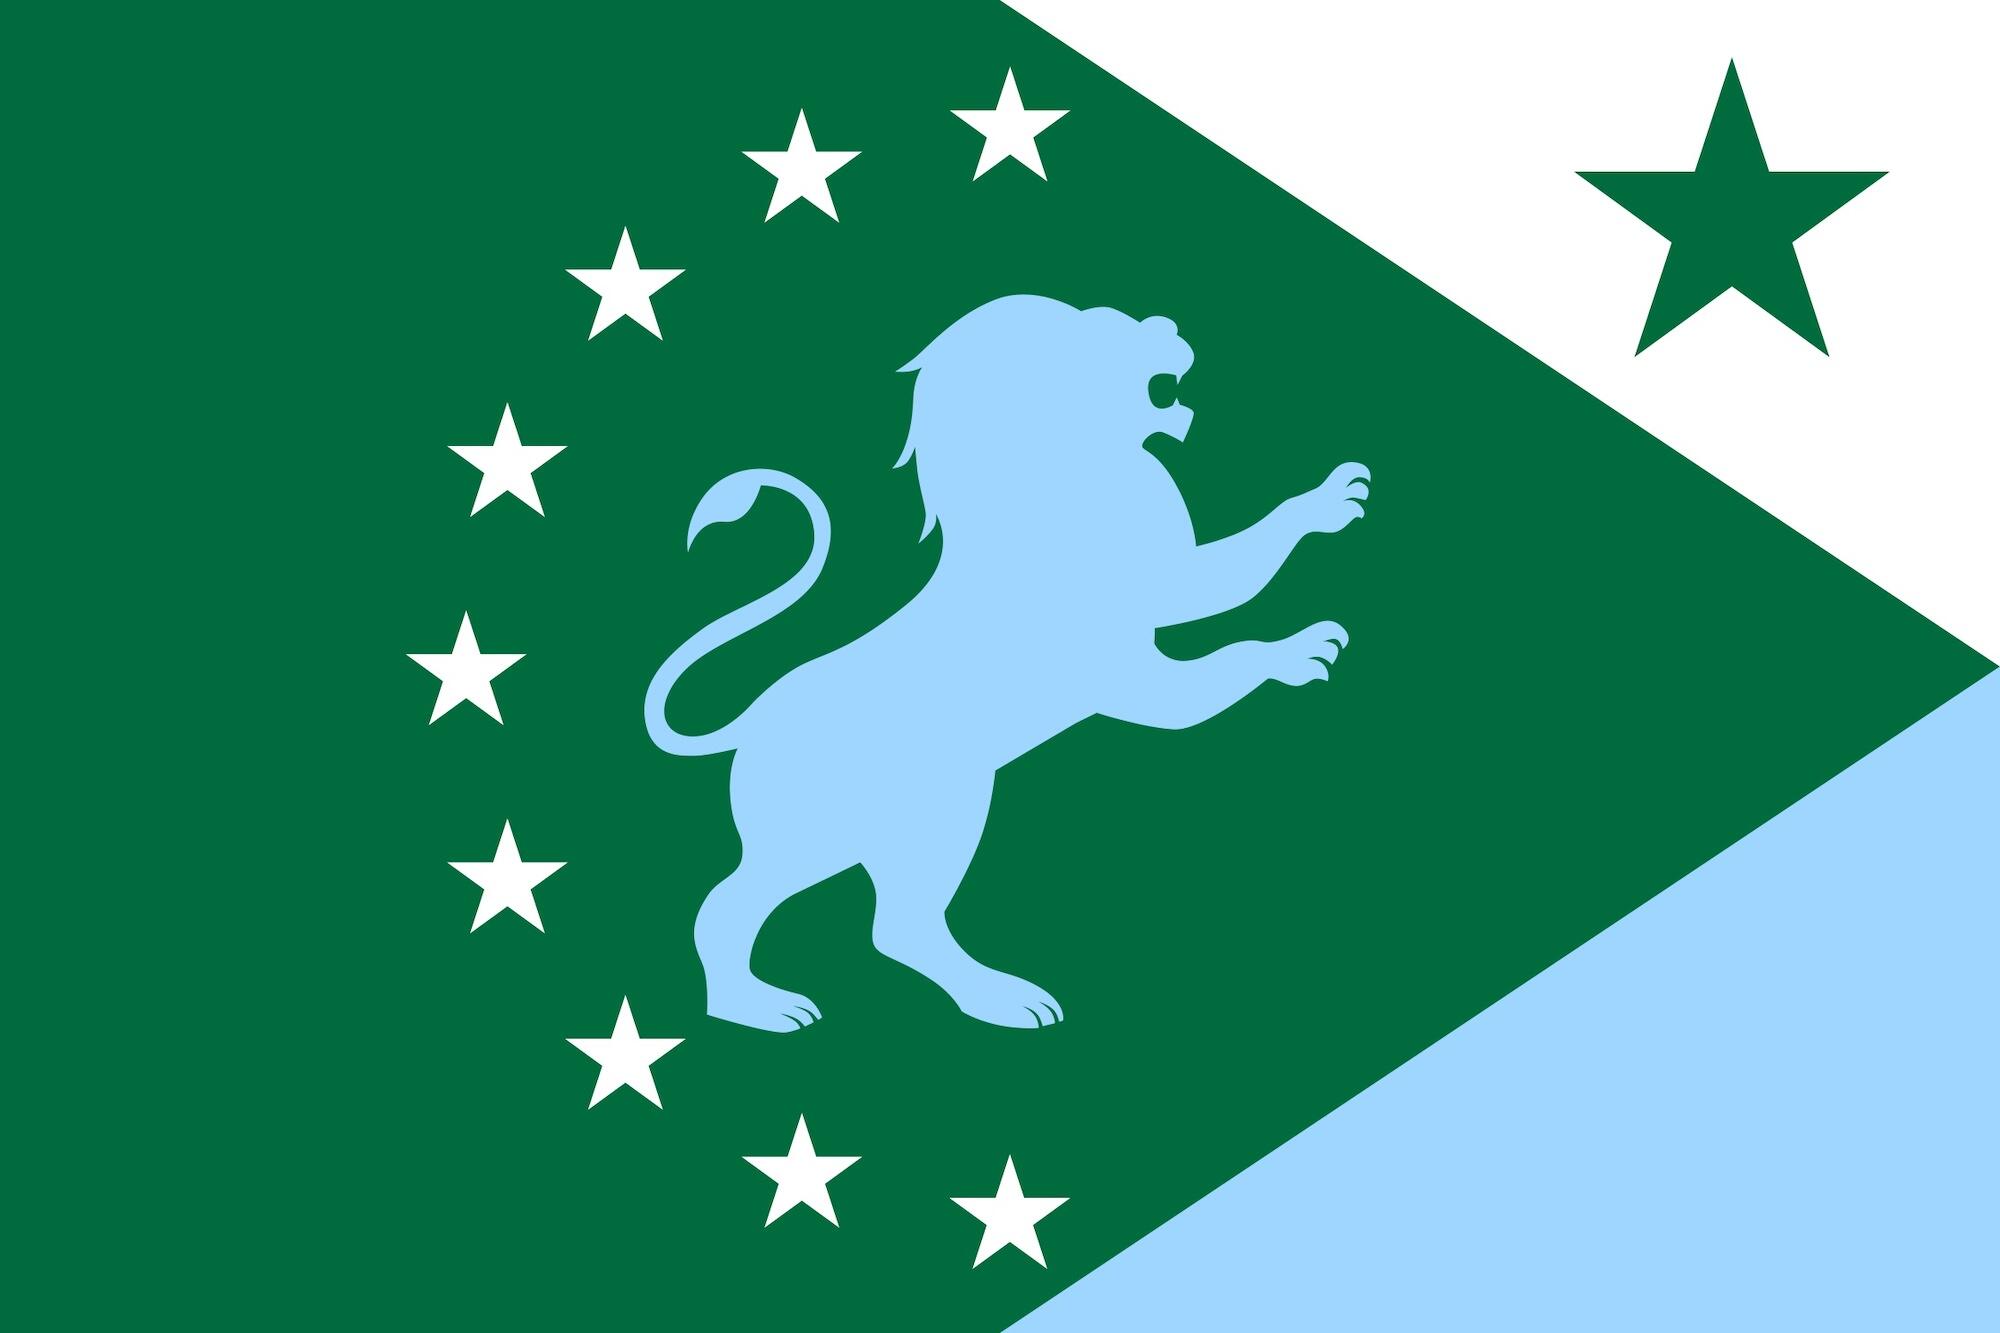 A blue lion on its hind legs against a green background with white stars surrounding half of it and a green star in the upper right corner.